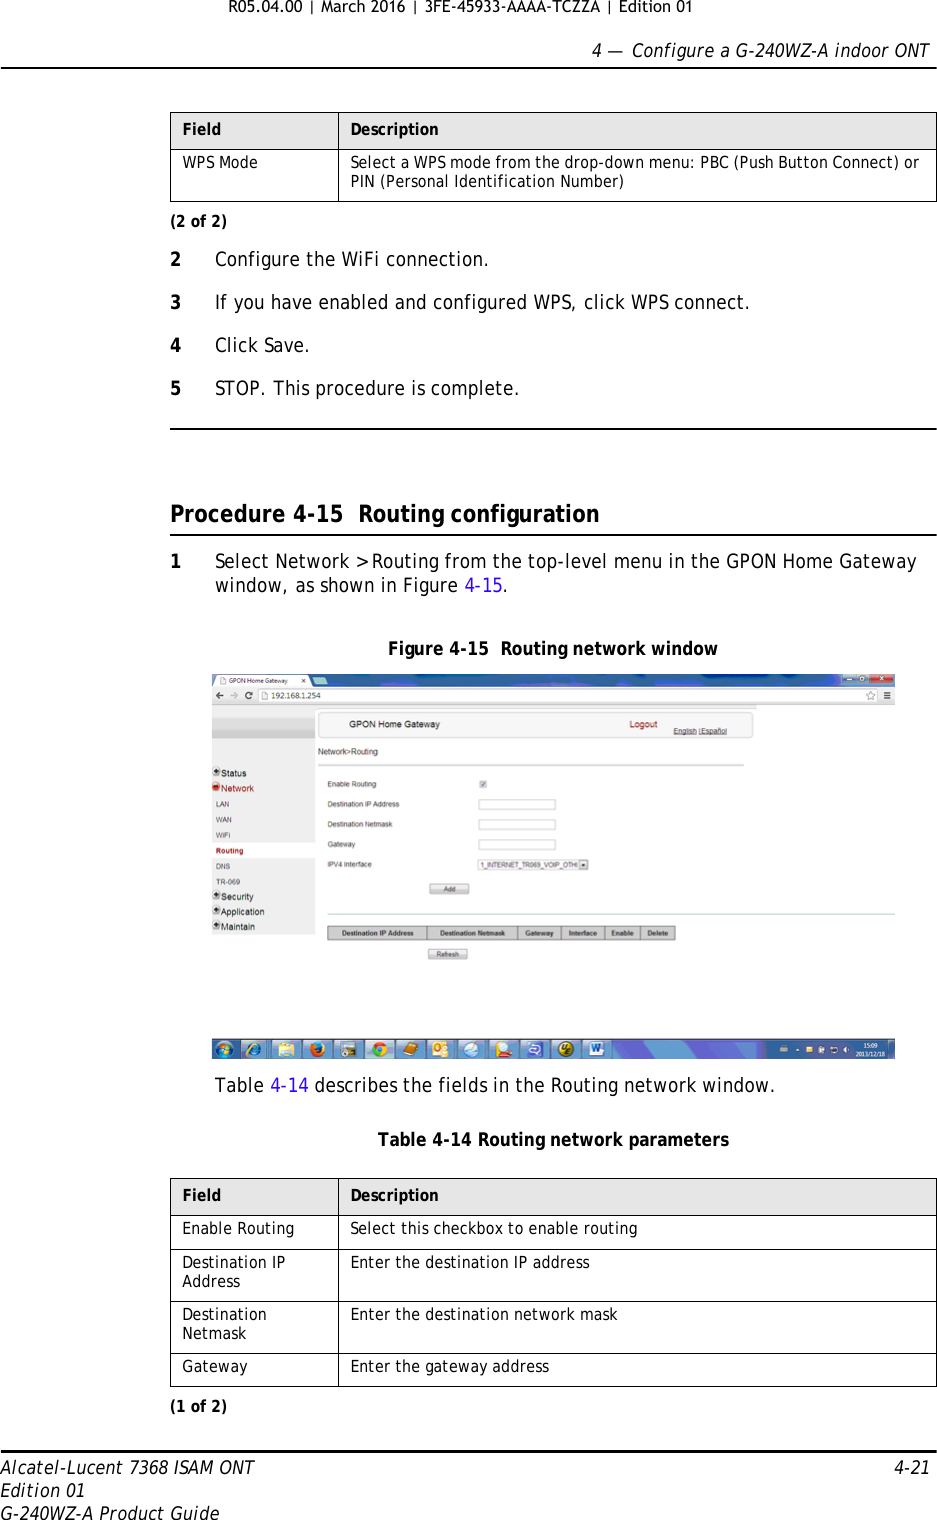 4 —  Configure a G-240WZ-A indoor ONTAlcatel-Lucent 7368 ISAM ONT 4-21Edition 01G-240WZ-A Product Guide2Configure the WiFi connection.3If you have enabled and configured WPS, click WPS connect.4Click Save.5STOP. This procedure is complete.Procedure 4-15  Routing configuration1Select Network &gt; Routing from the top-level menu in the GPON Home Gateway window, as shown in Figure 4-15.Figure 4-15  Routing network windowTable 4-14 describes the fields in the Routing network window.Table 4-14 Routing network parametersWPS Mode Select a WPS mode from the drop-down menu: PBC (Push Button Connect) or PIN (Personal Identification Number)Field DescriptionEnable Routing Select this checkbox to enable routingDestination IP Address Enter the destination IP addressDestination Netmask Enter the destination network maskGateway Enter the gateway address(1 of 2)Field Description(2 of 2)R05.04.00 | March 2016 | 3FE-45933-AAAA-TCZZA | Edition 01 